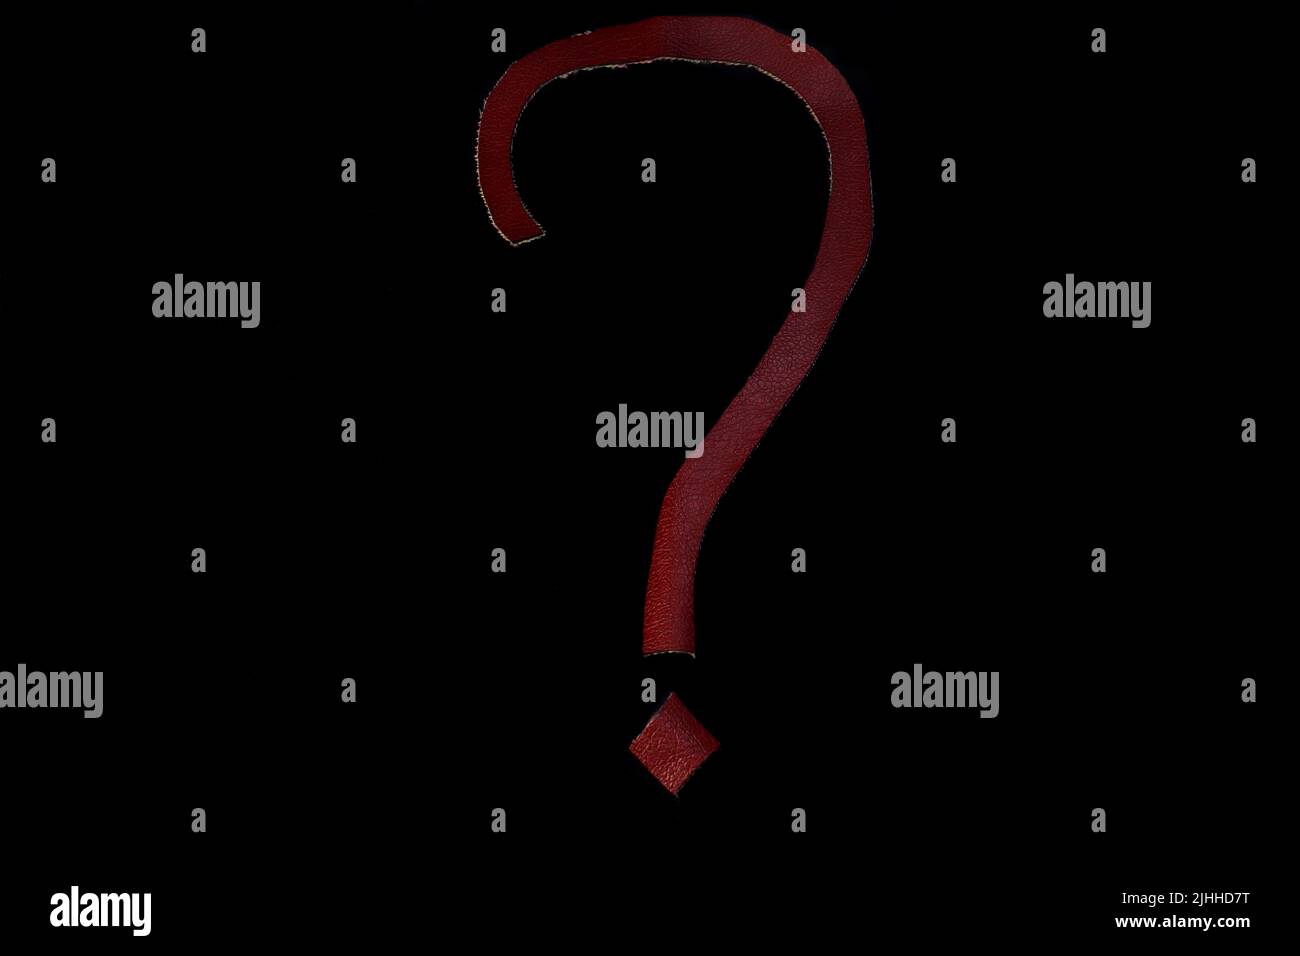 Hand cut red leather question mark on a saturated black background. Stock Photo